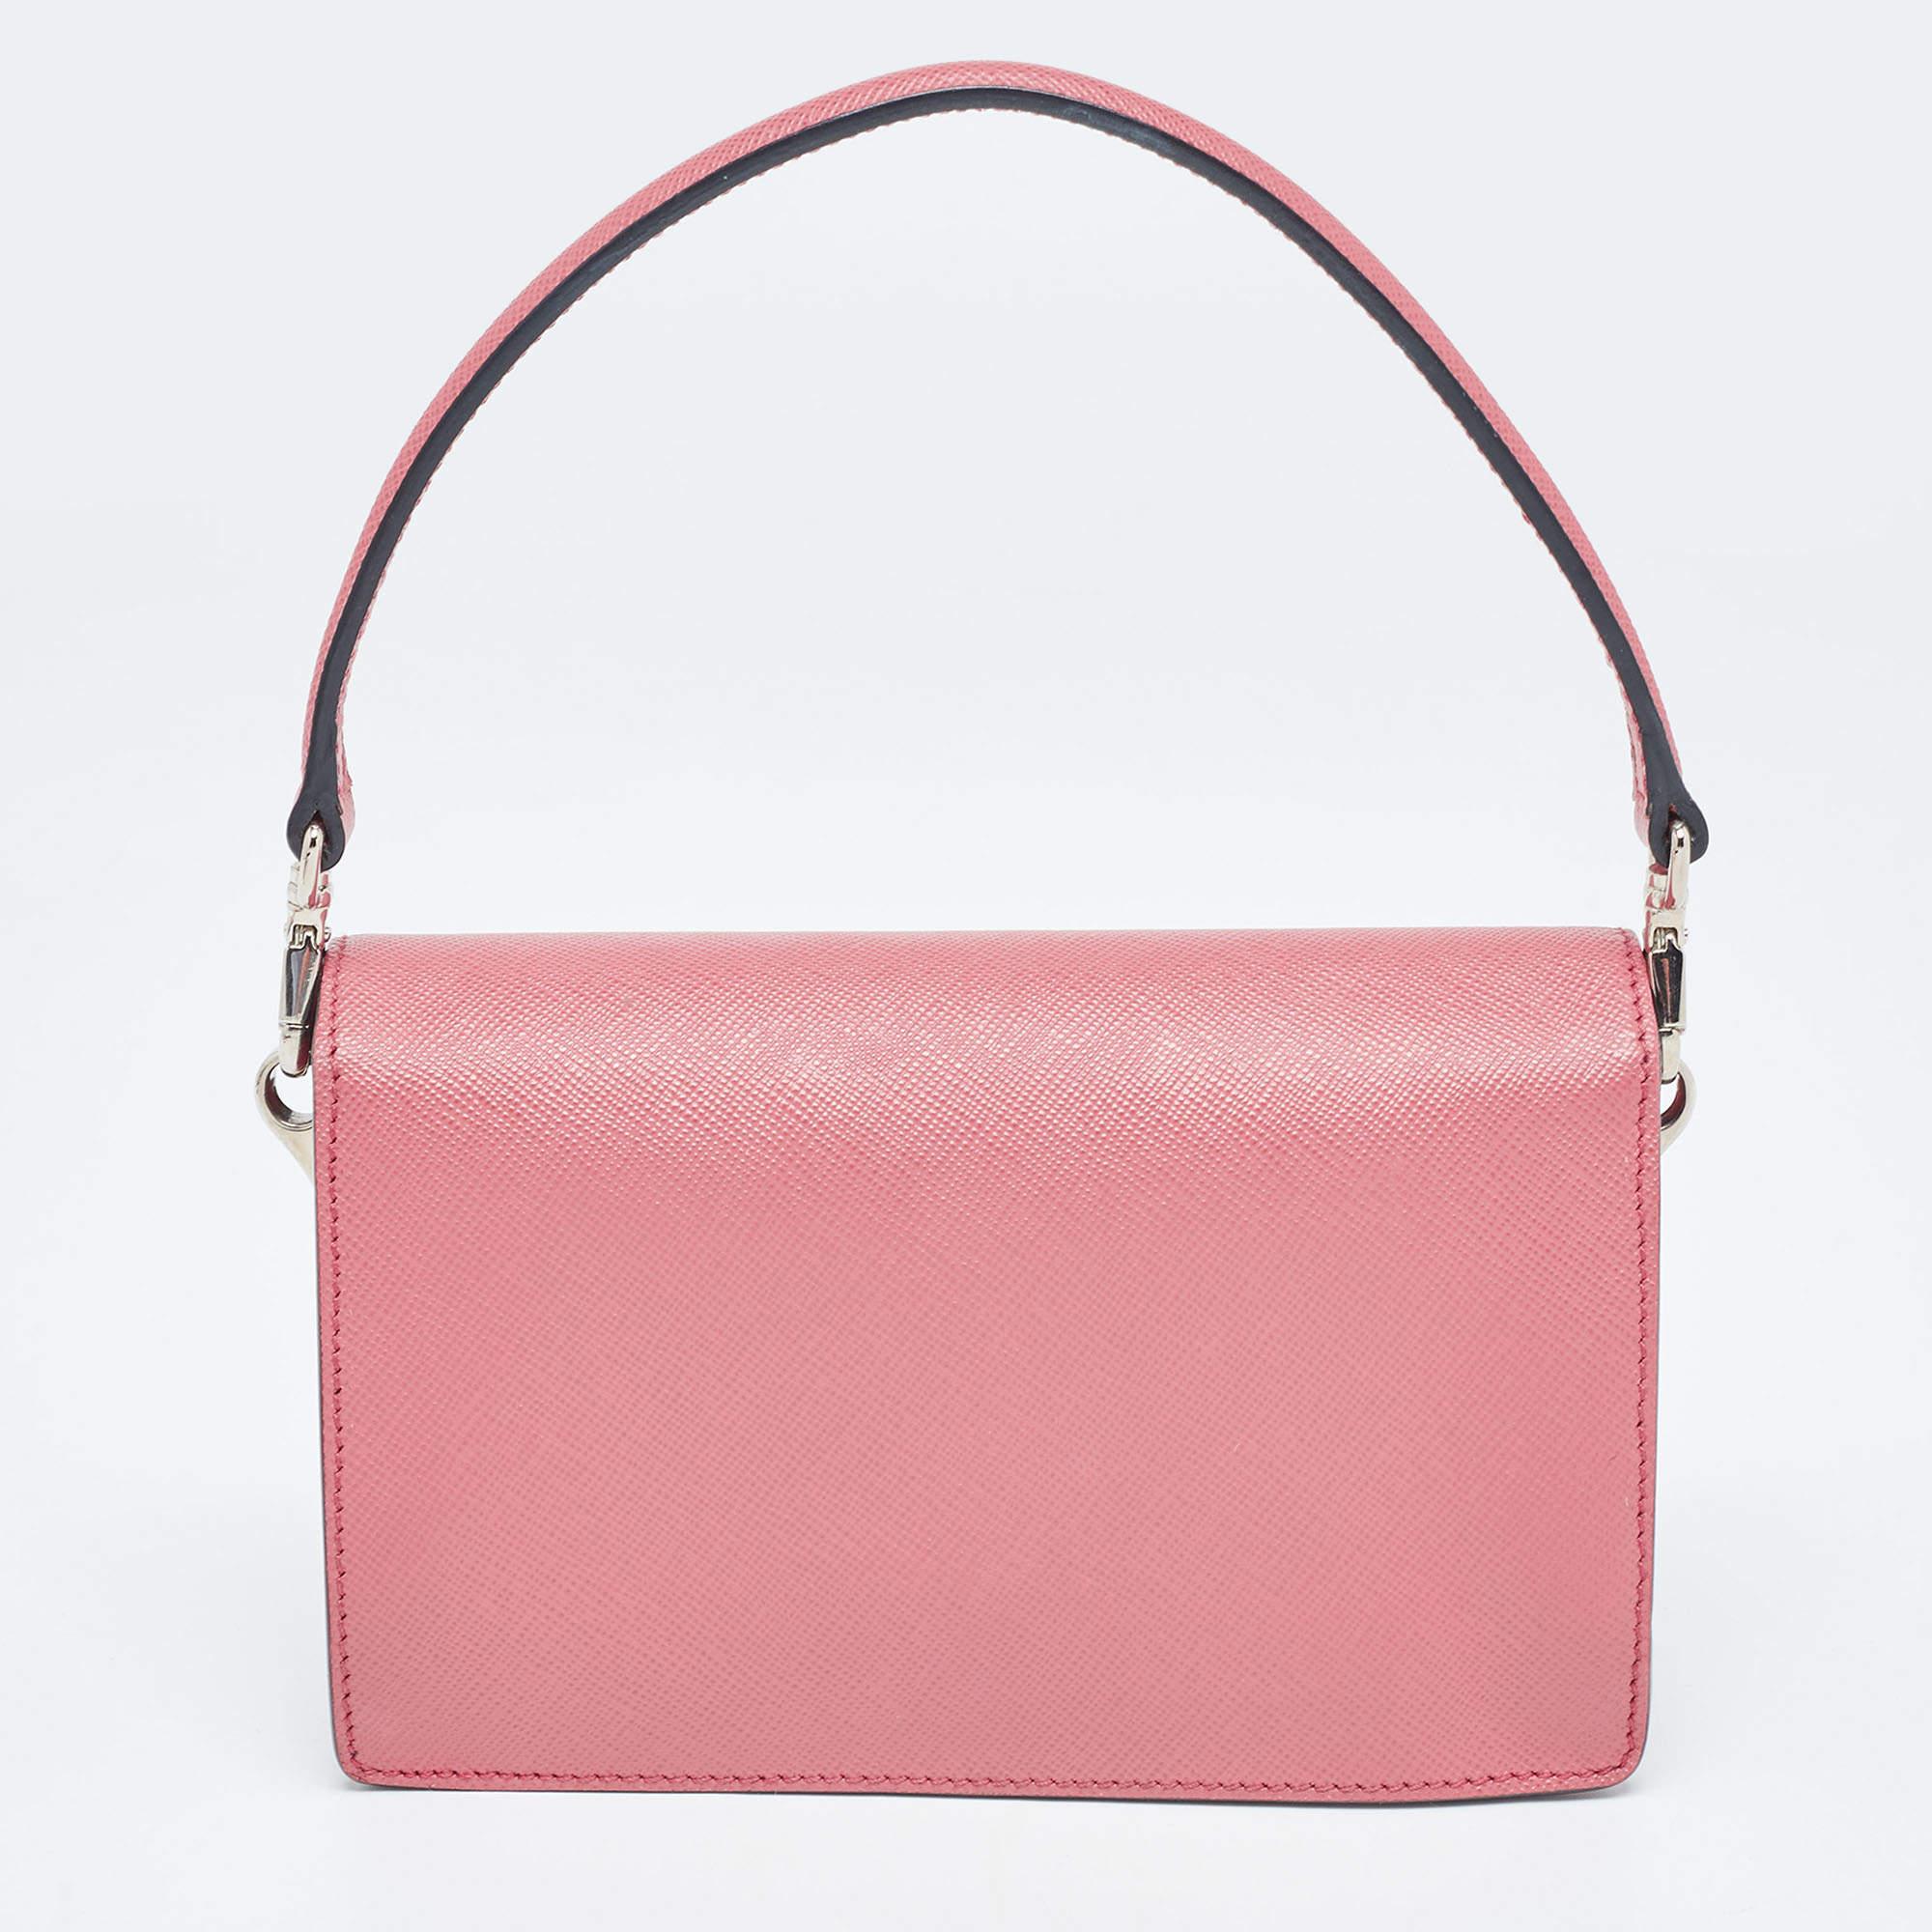 Express your personal style with this high-end crossbody bag. Crafted from quality materials, it has been added with fine details and is finished perfectly. It features a well-sized interior.

Includes: Detachable Strap
